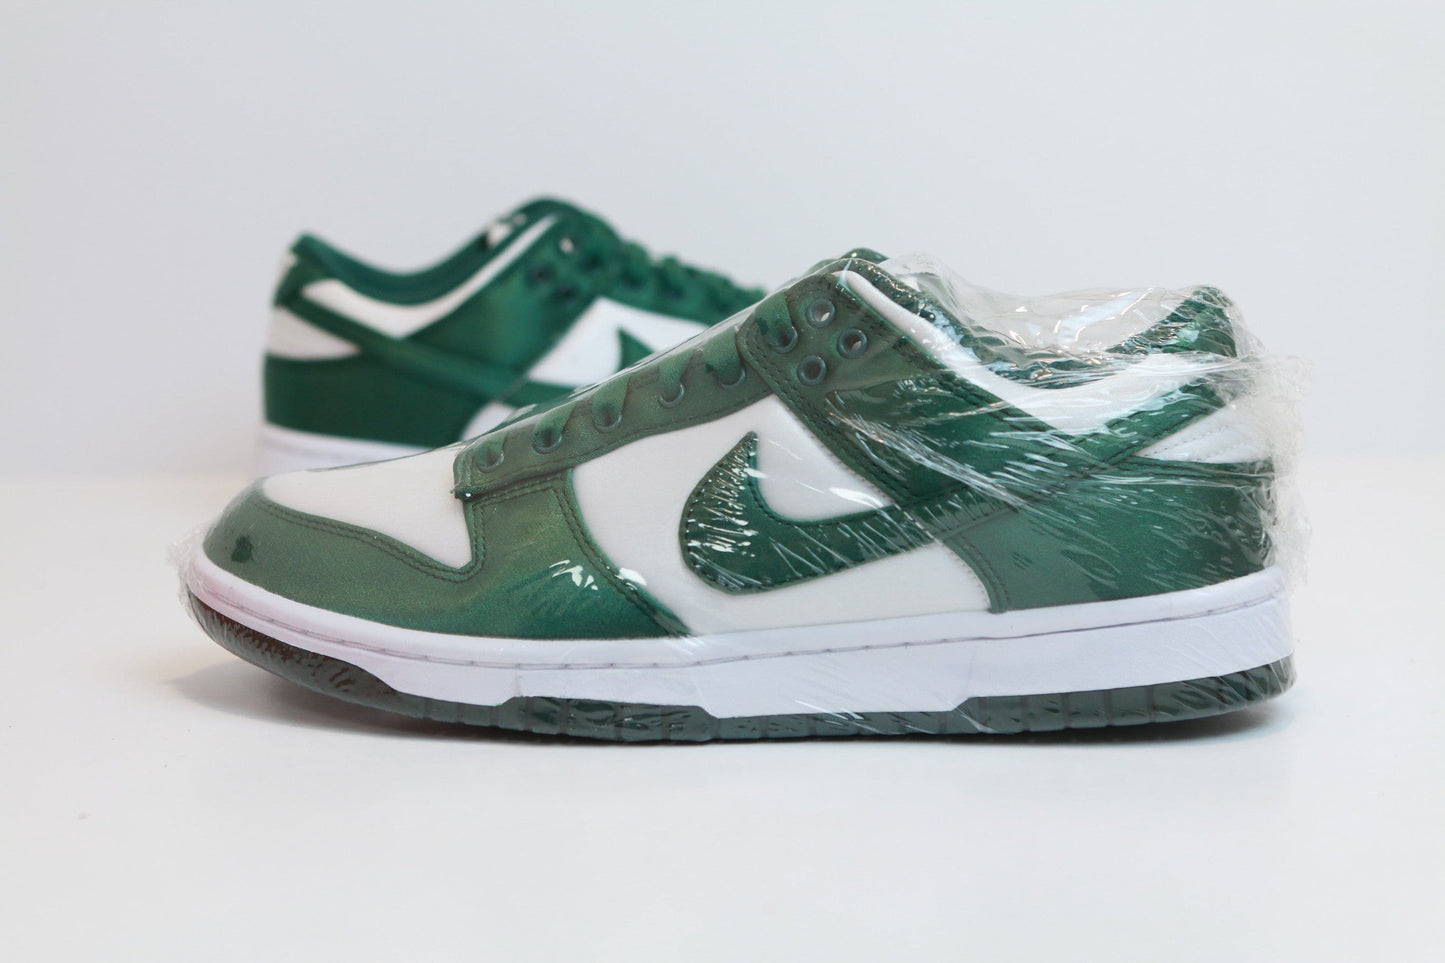 NIKE DUNK LOW SATIN TEAM GREEN DS SIZE 8W